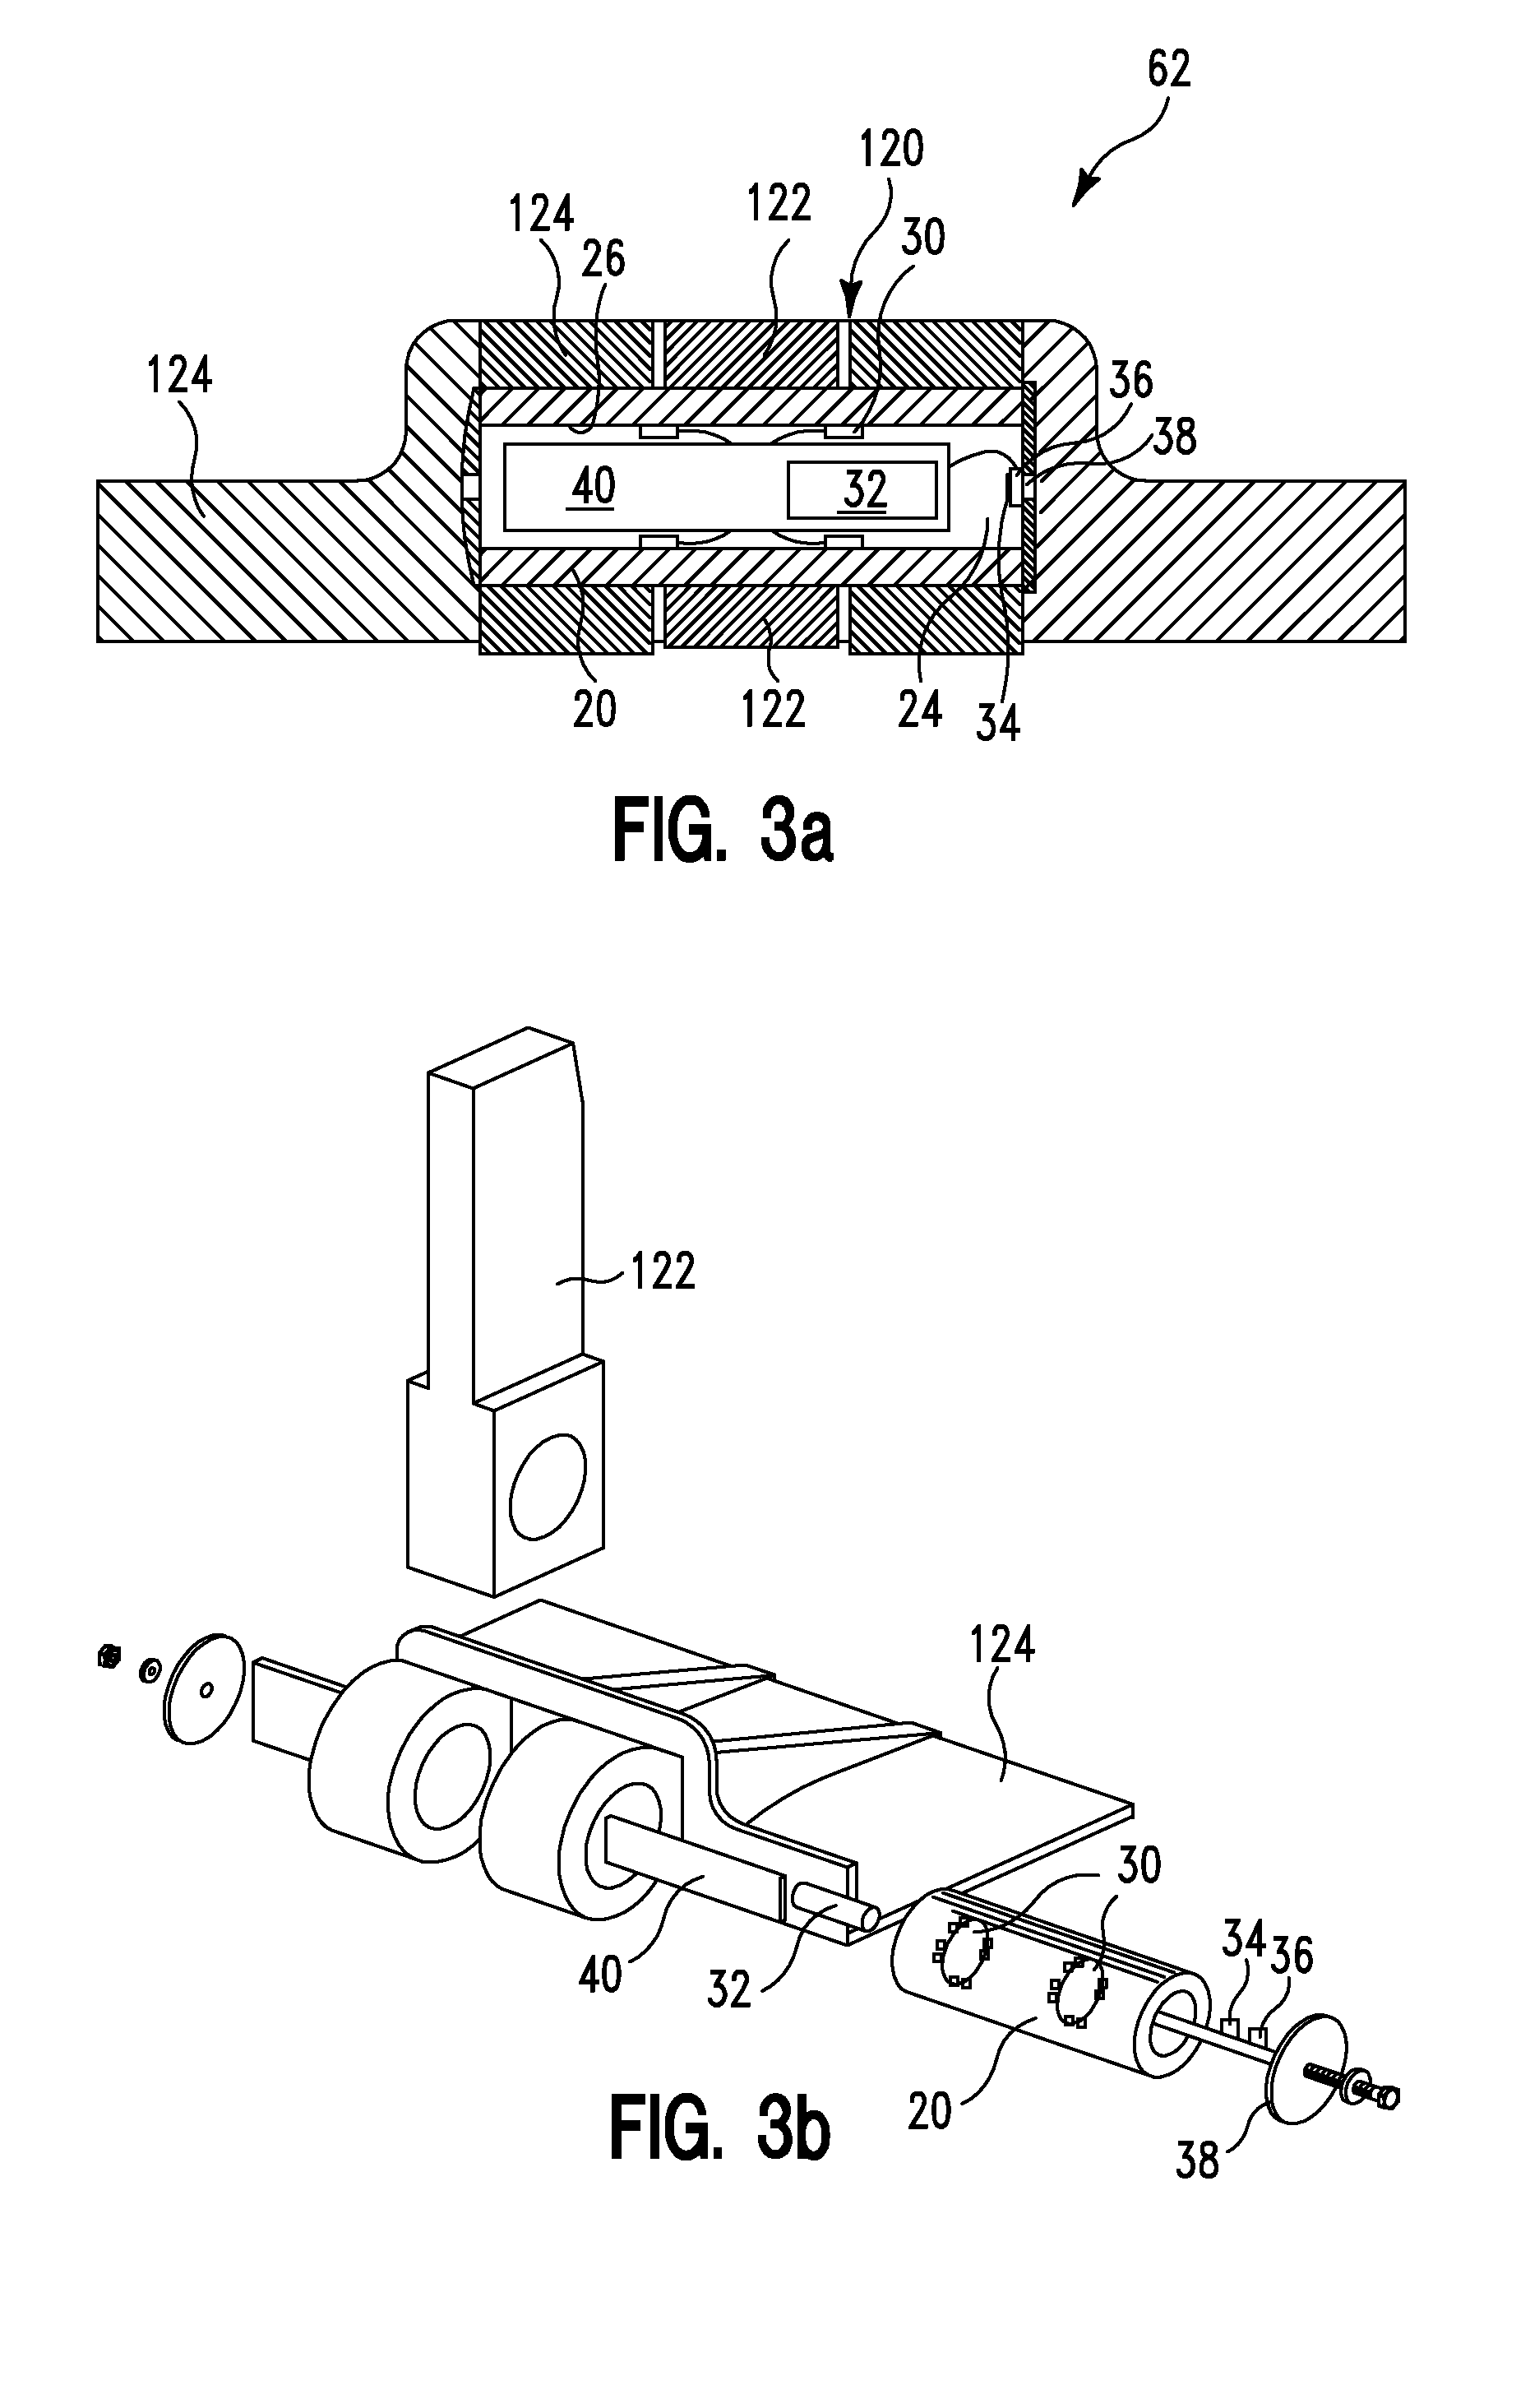 Independently Calibrated Wireless Structural Load Sensor